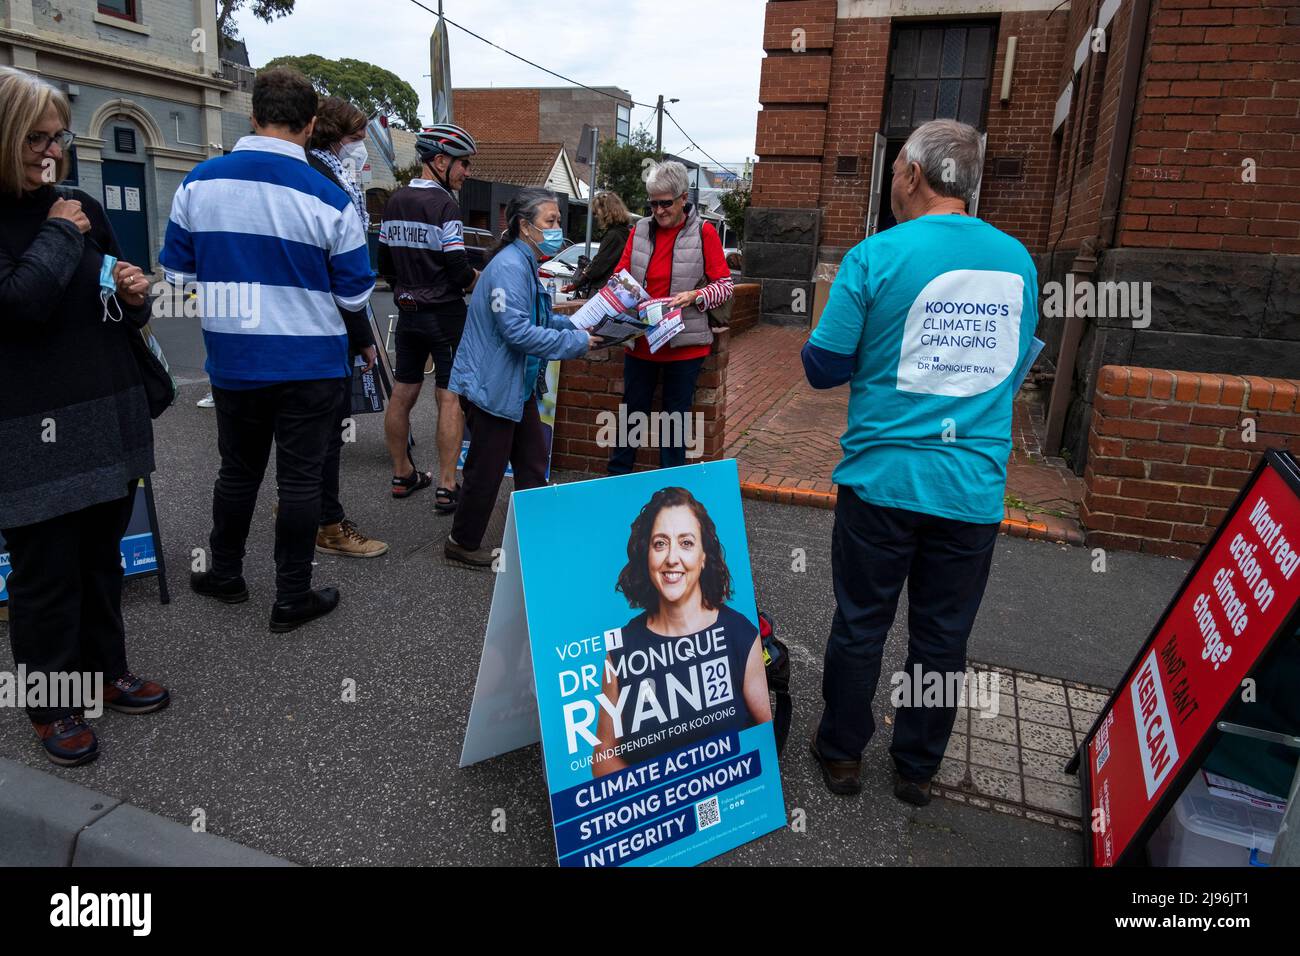 A voting station in Collingwood, operating for the 2022 Australian Federal elections. Collingwood, Melbourne, Victoria, Australia. Stock Photo